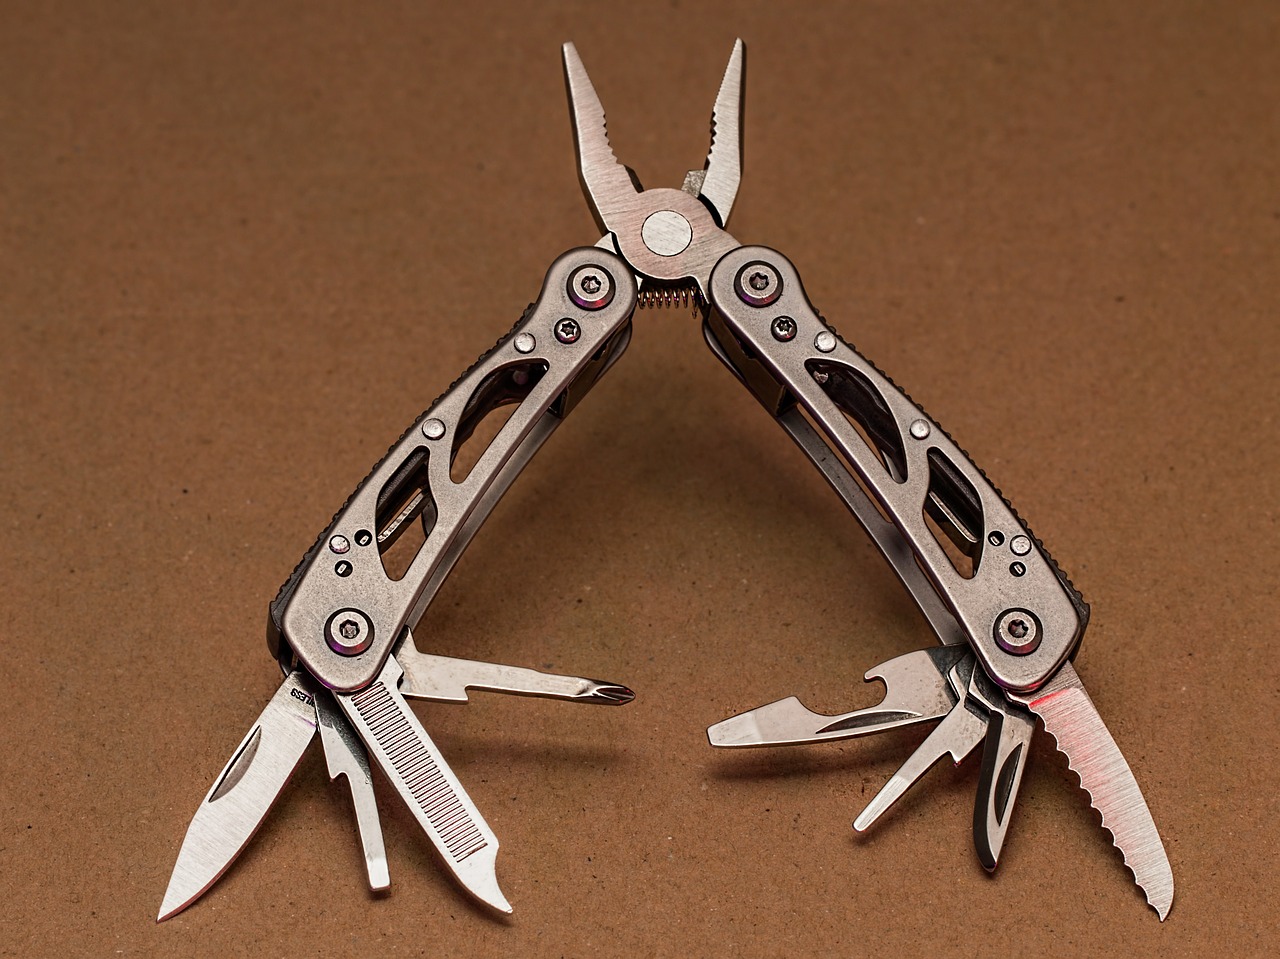 Multi Tool for family camping trip